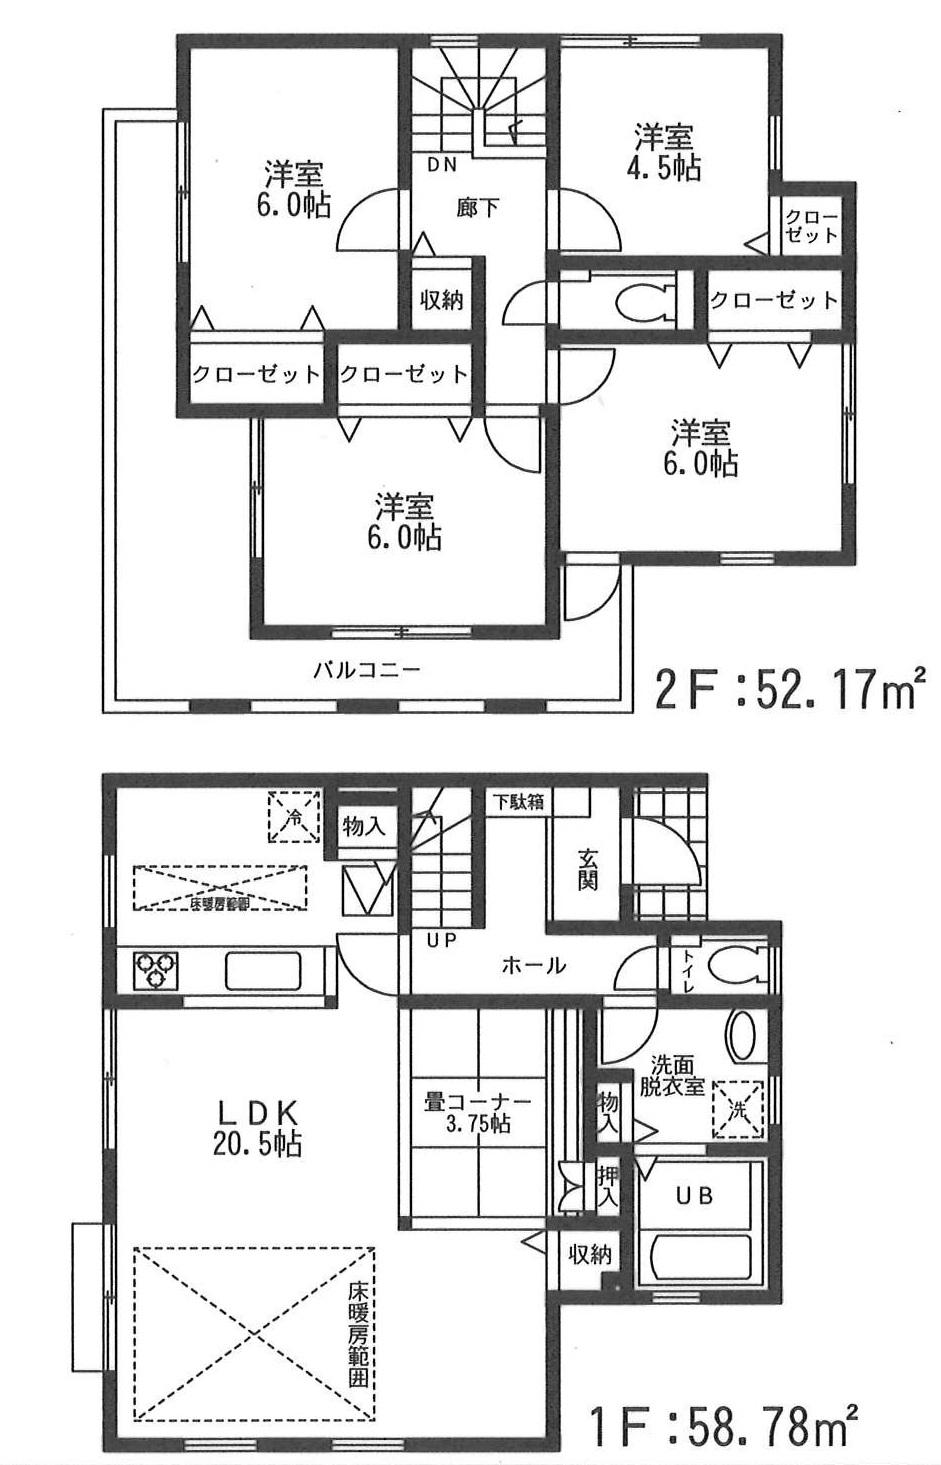 Building plan example (floor plan). Building reference plan. 4SLDK area / 110.95 sq m  Building price / 17.5 million (tax included)